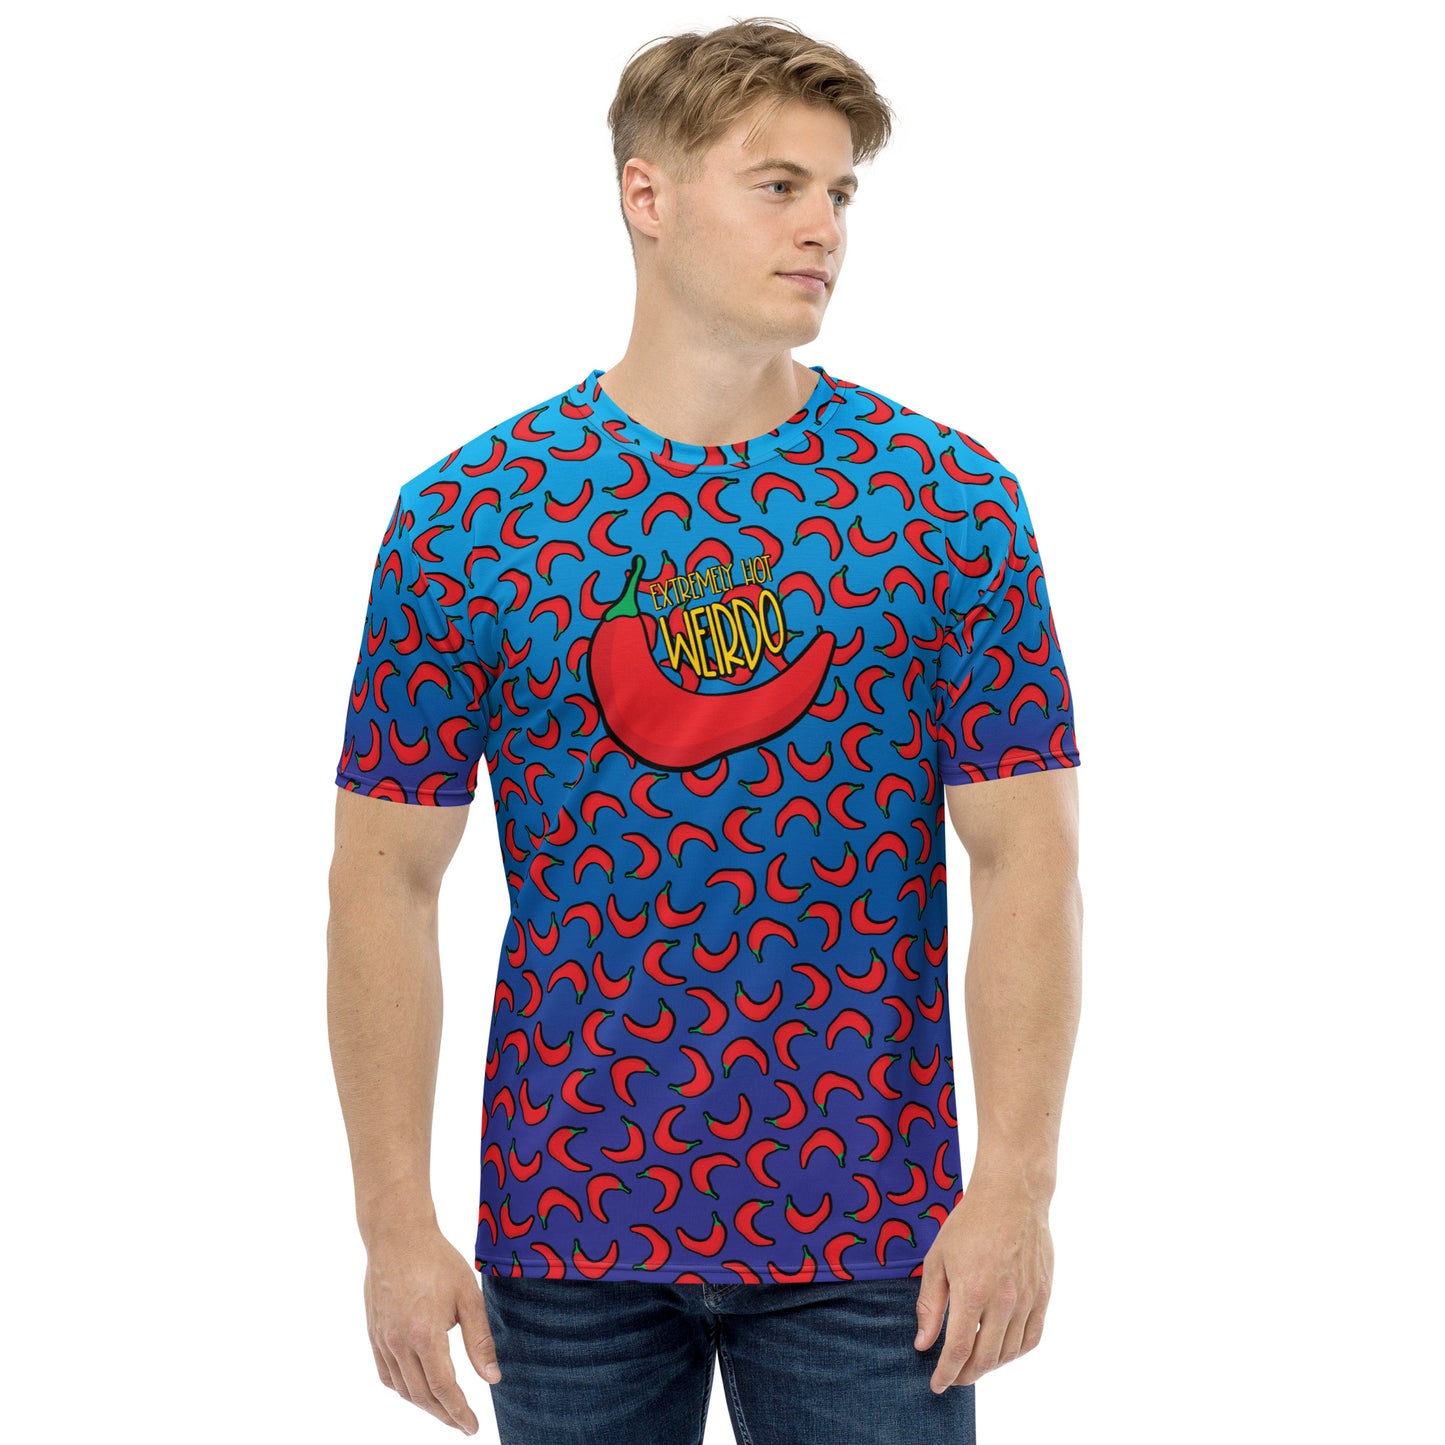 #WEIRDO | Weird t shirt man. This t shirt is blue and has red peppers printed all over the shirt. Of course our fun meme is printed at the back of the t shirt; Extremely Hot Weirdo.